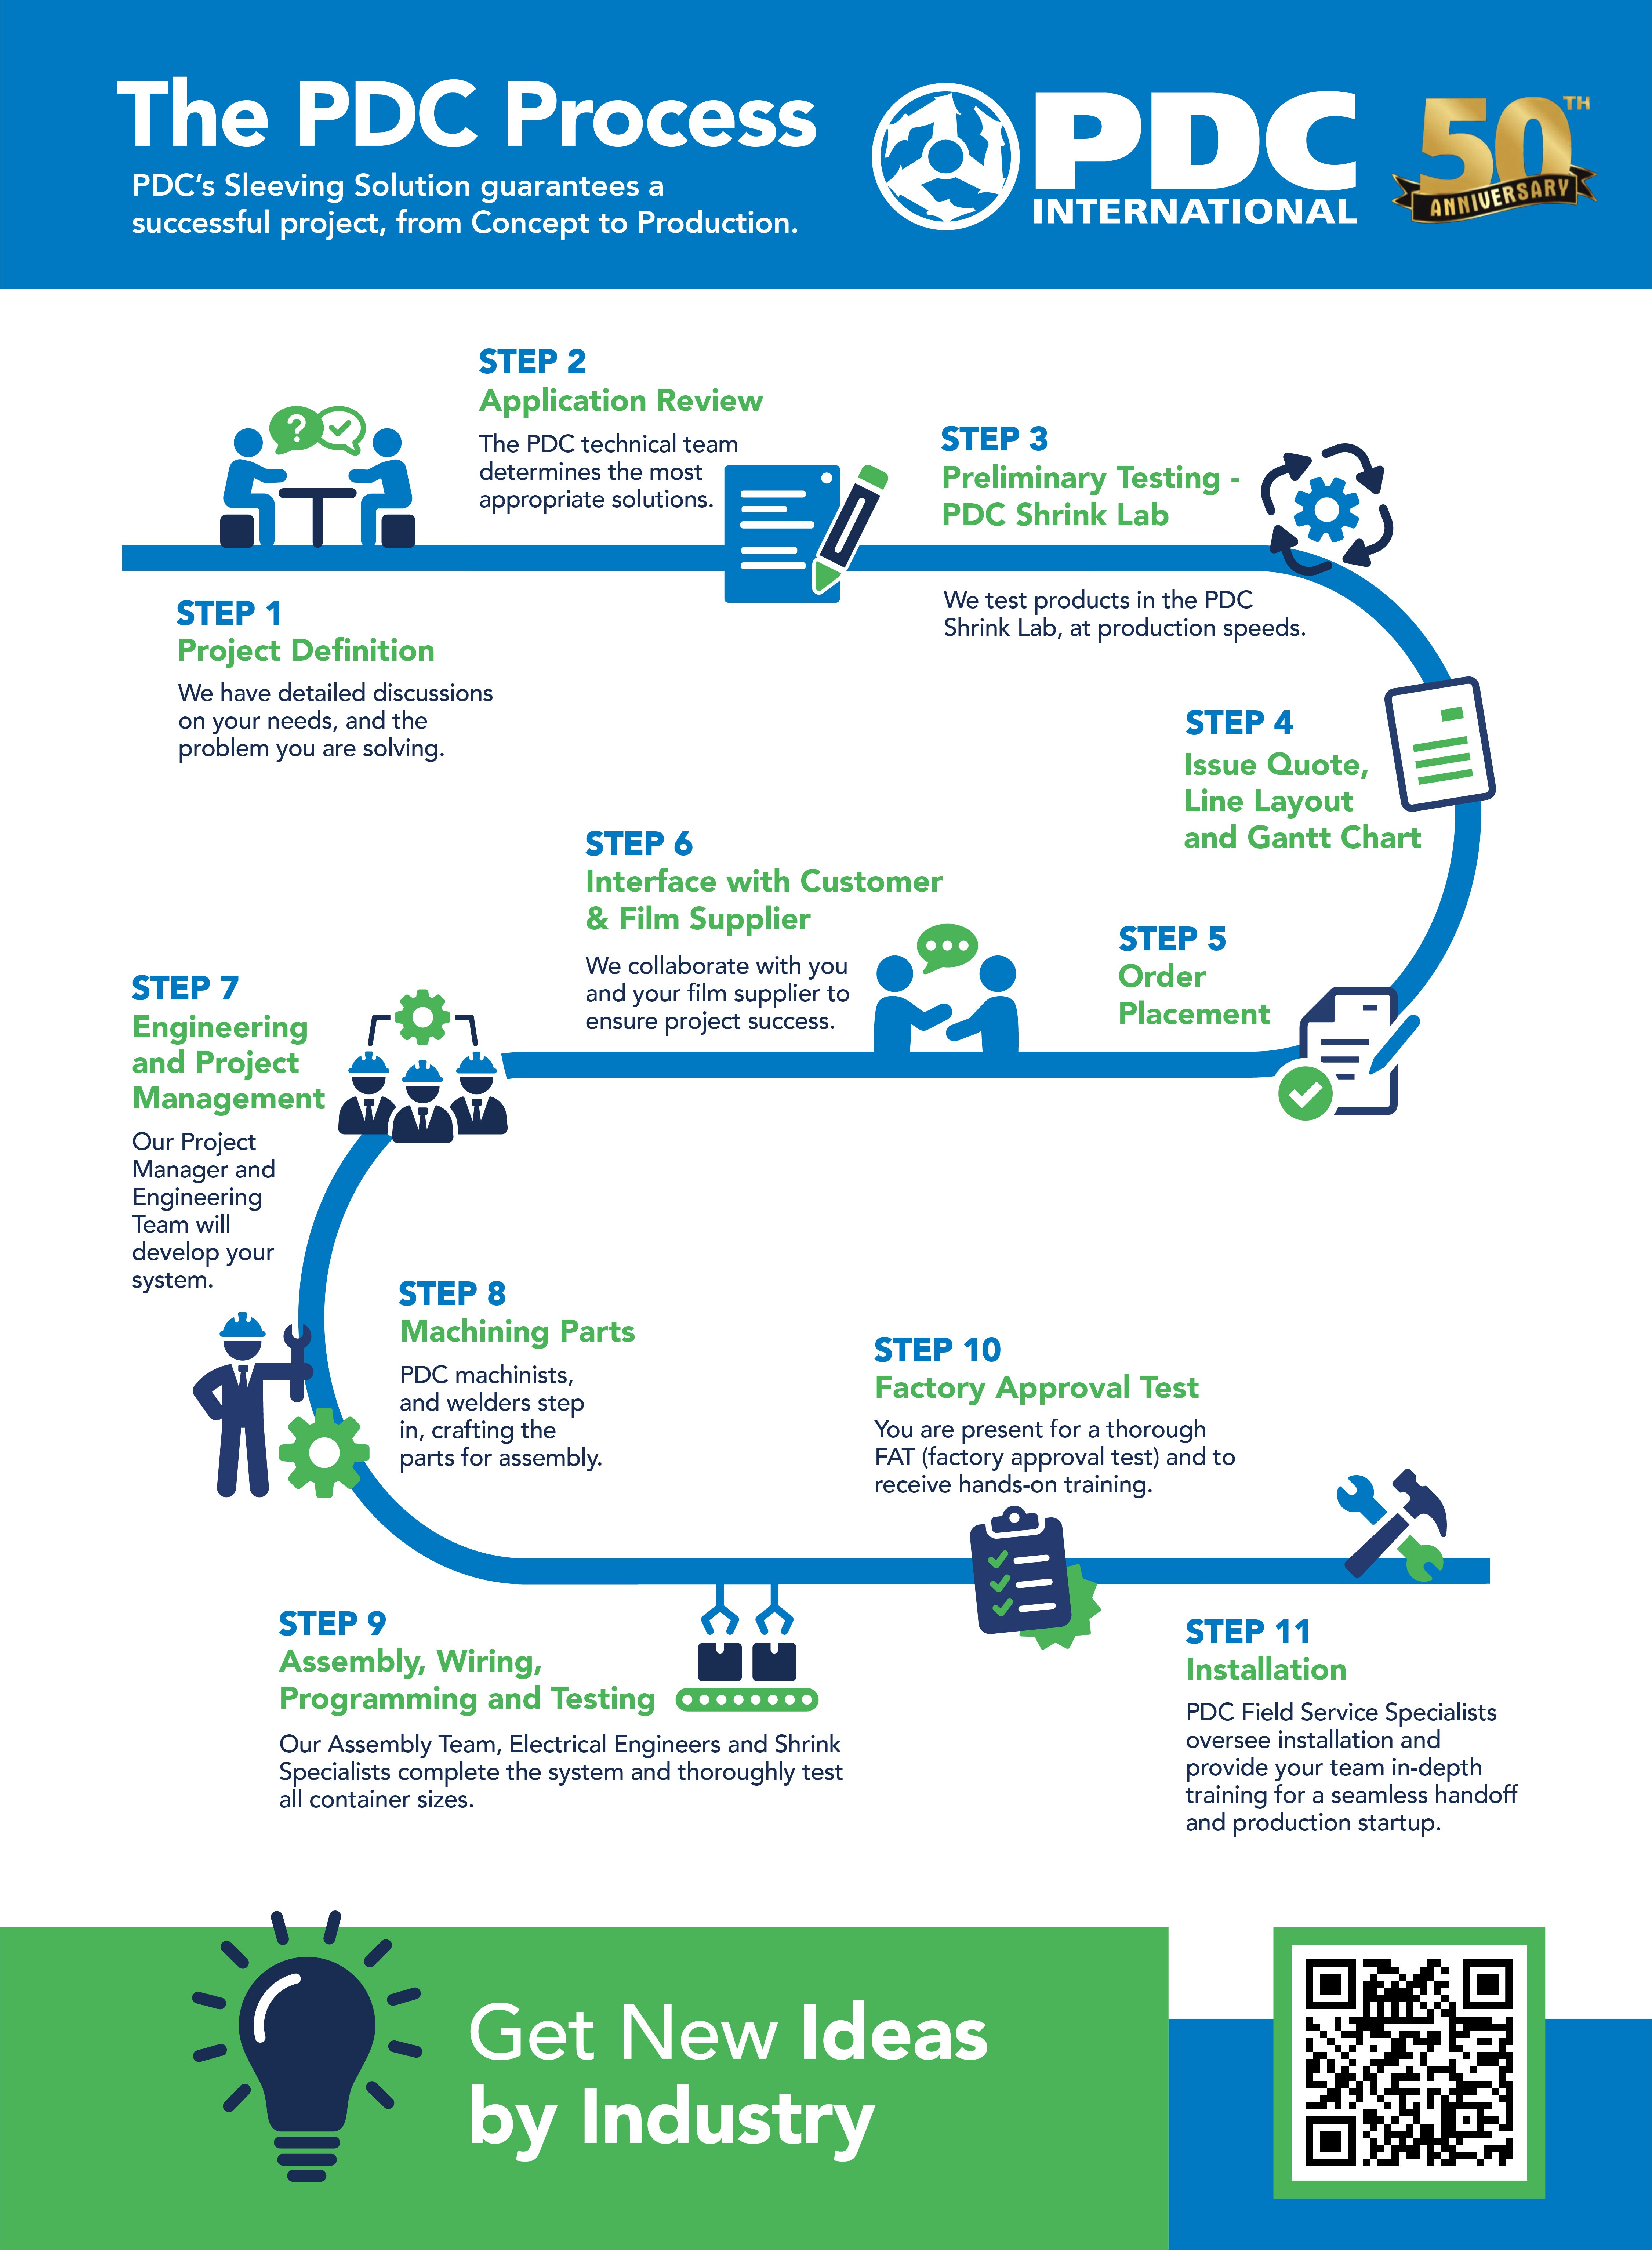 PDC23029 The PDC Process Infographic_8.5x11_V4-03-07-24 (1)